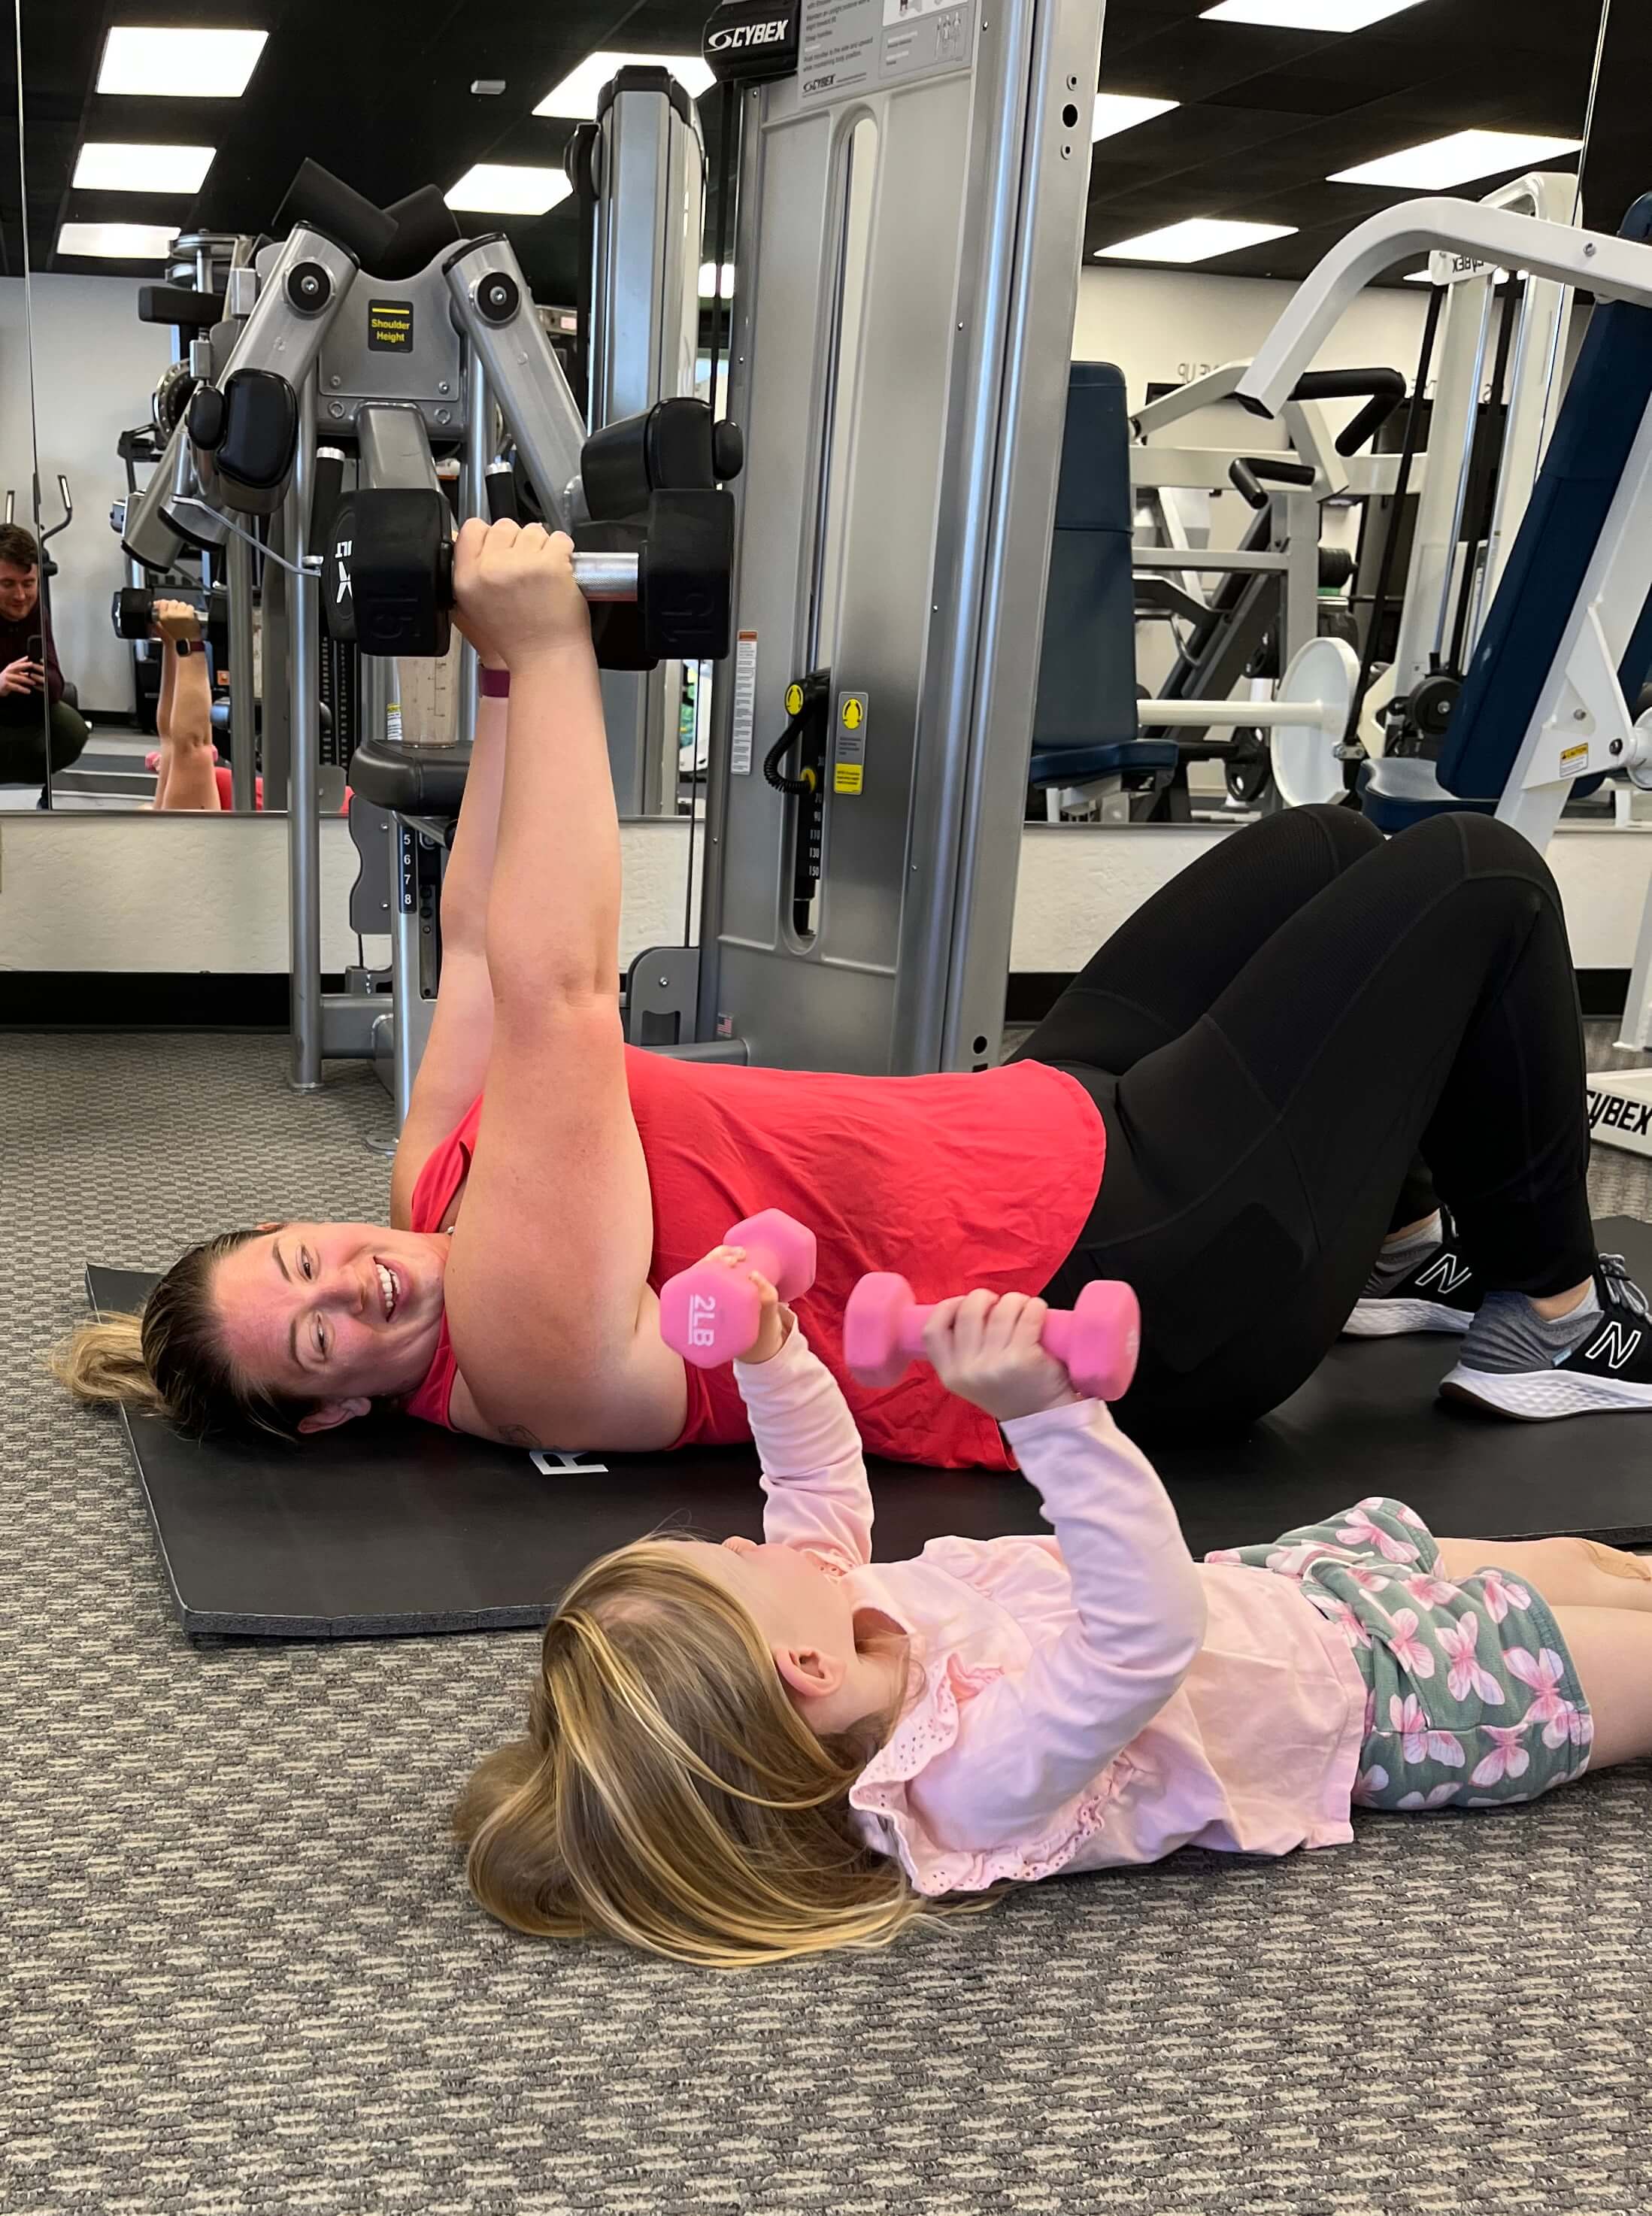 Mother and daughter personal training session.